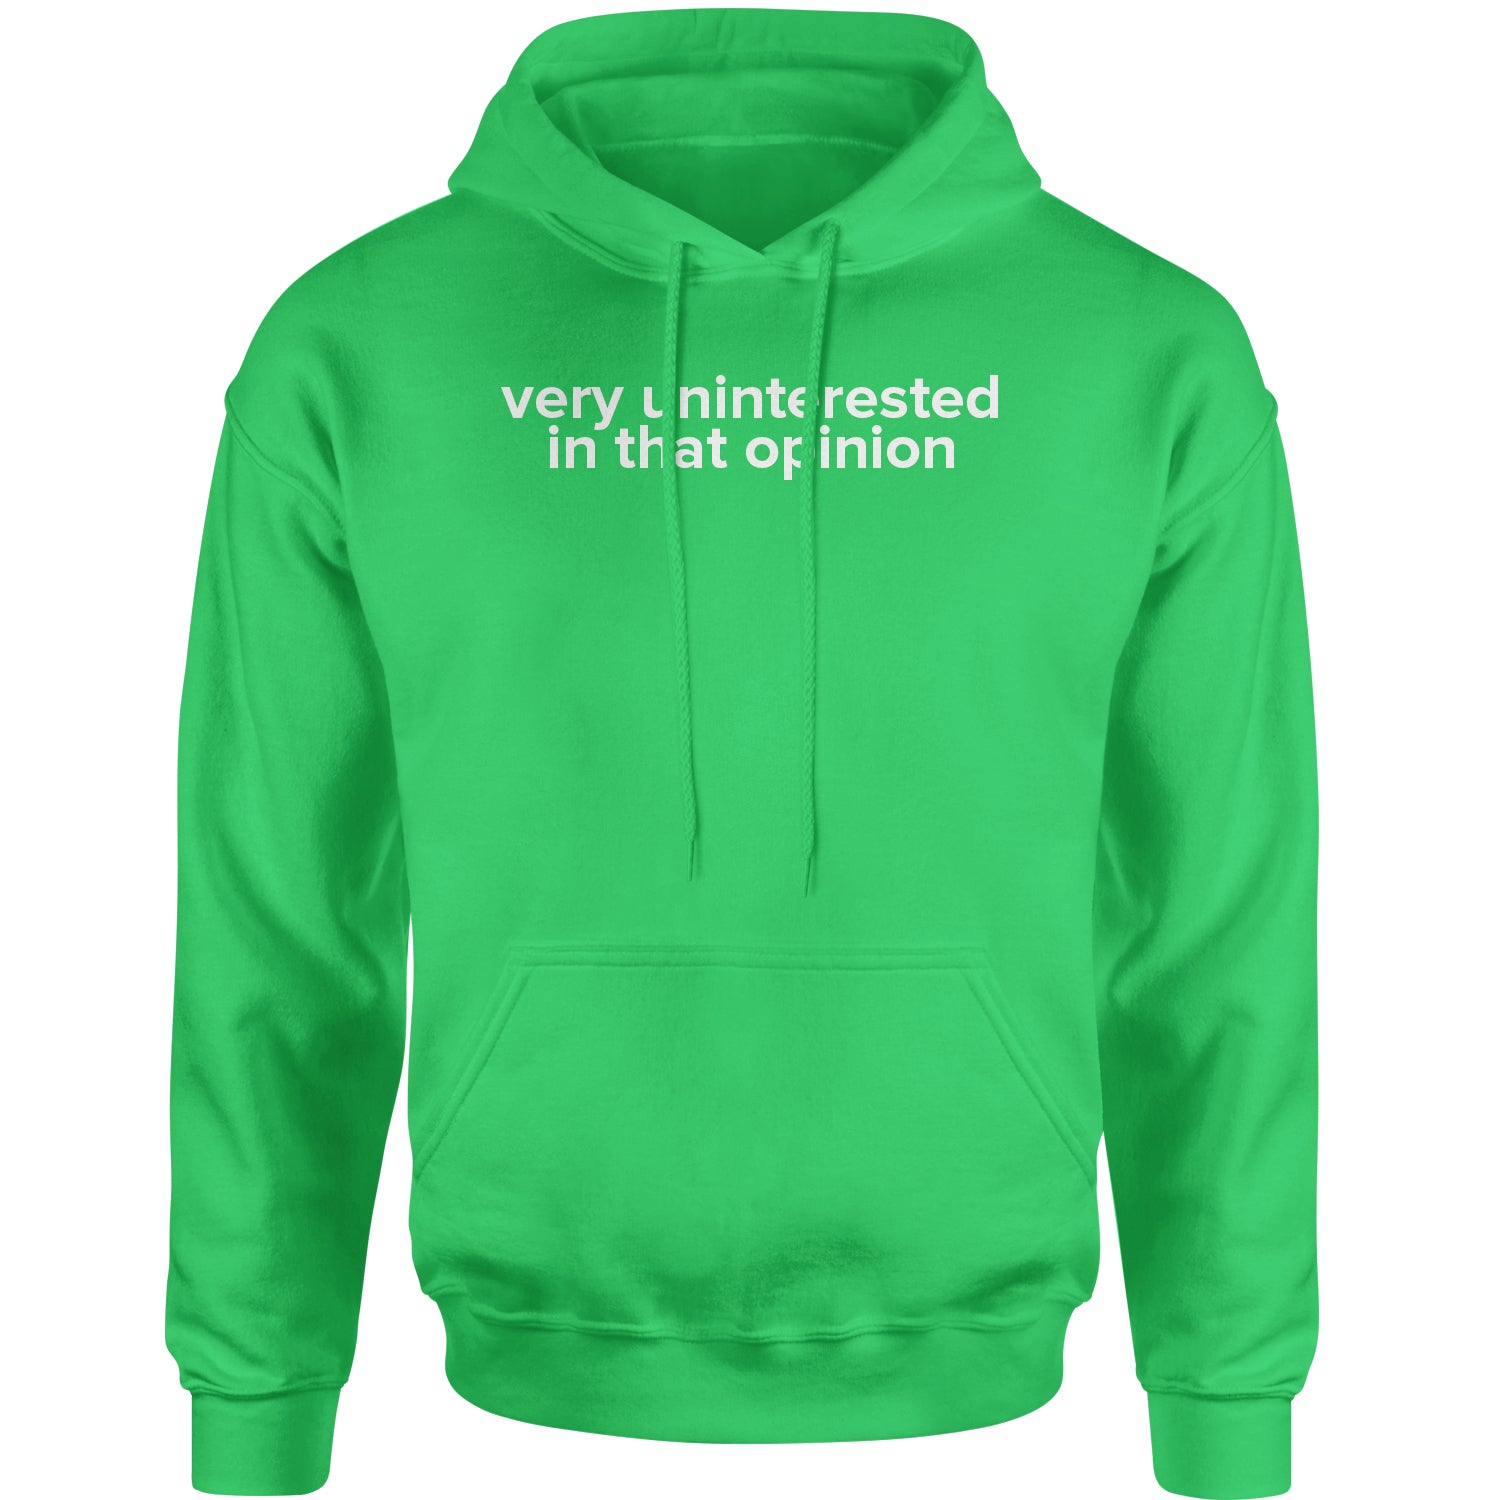 Very Uninterested In That Opinion Adult Hoodie Sweatshirt alexis, creek, d, schitt, schitts by Expression Tees